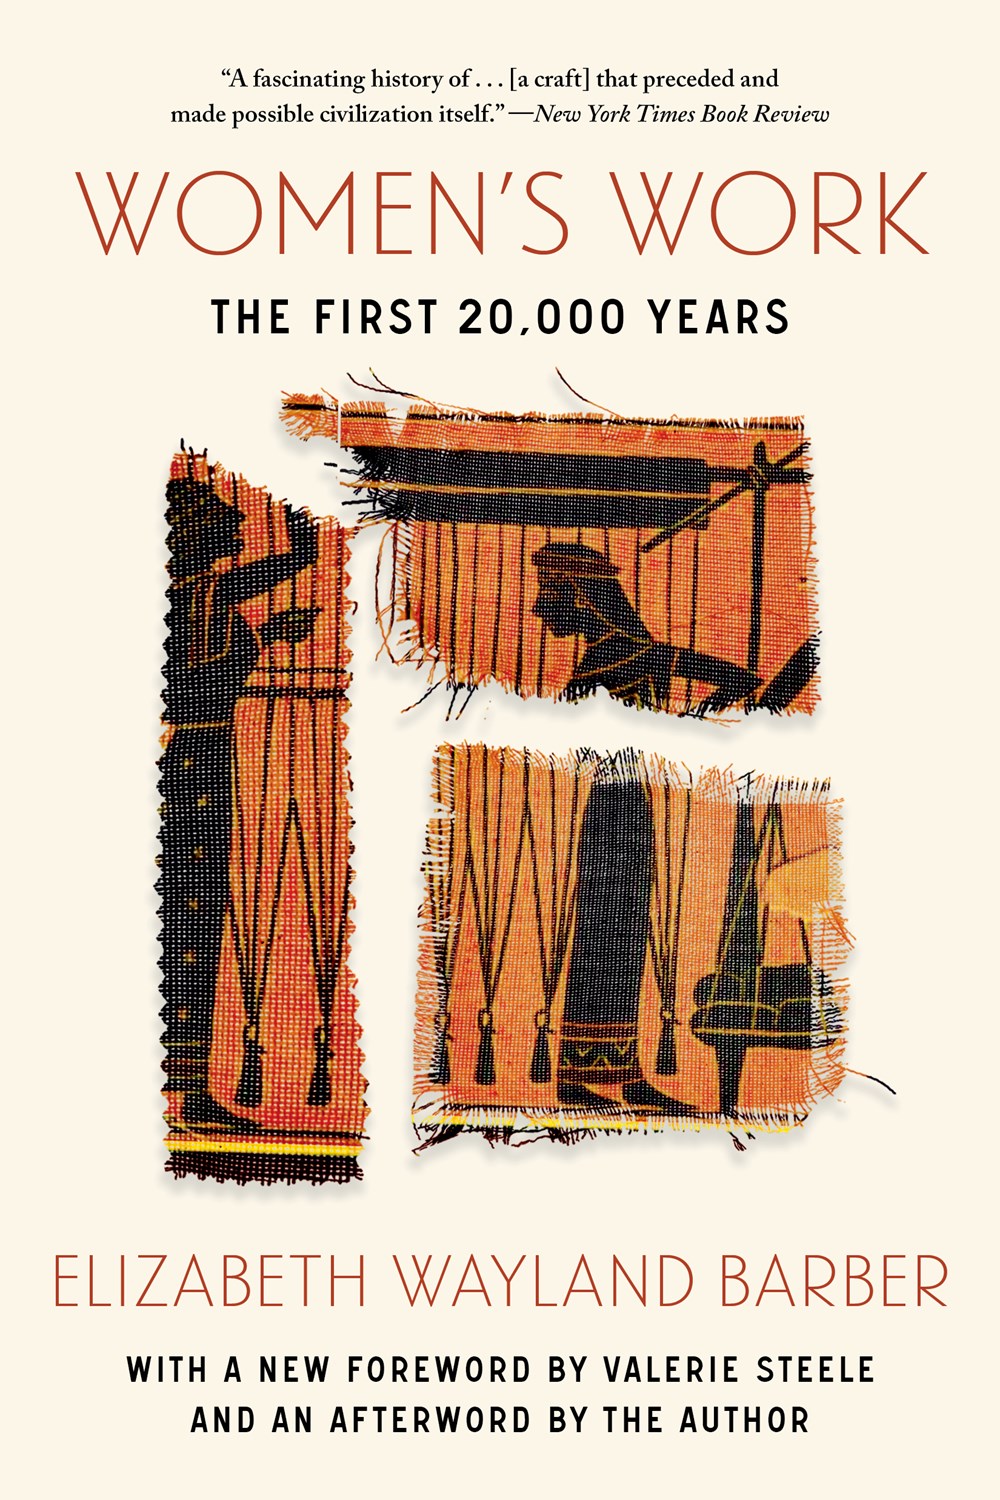 Women’s Work: The First 20,000 Years